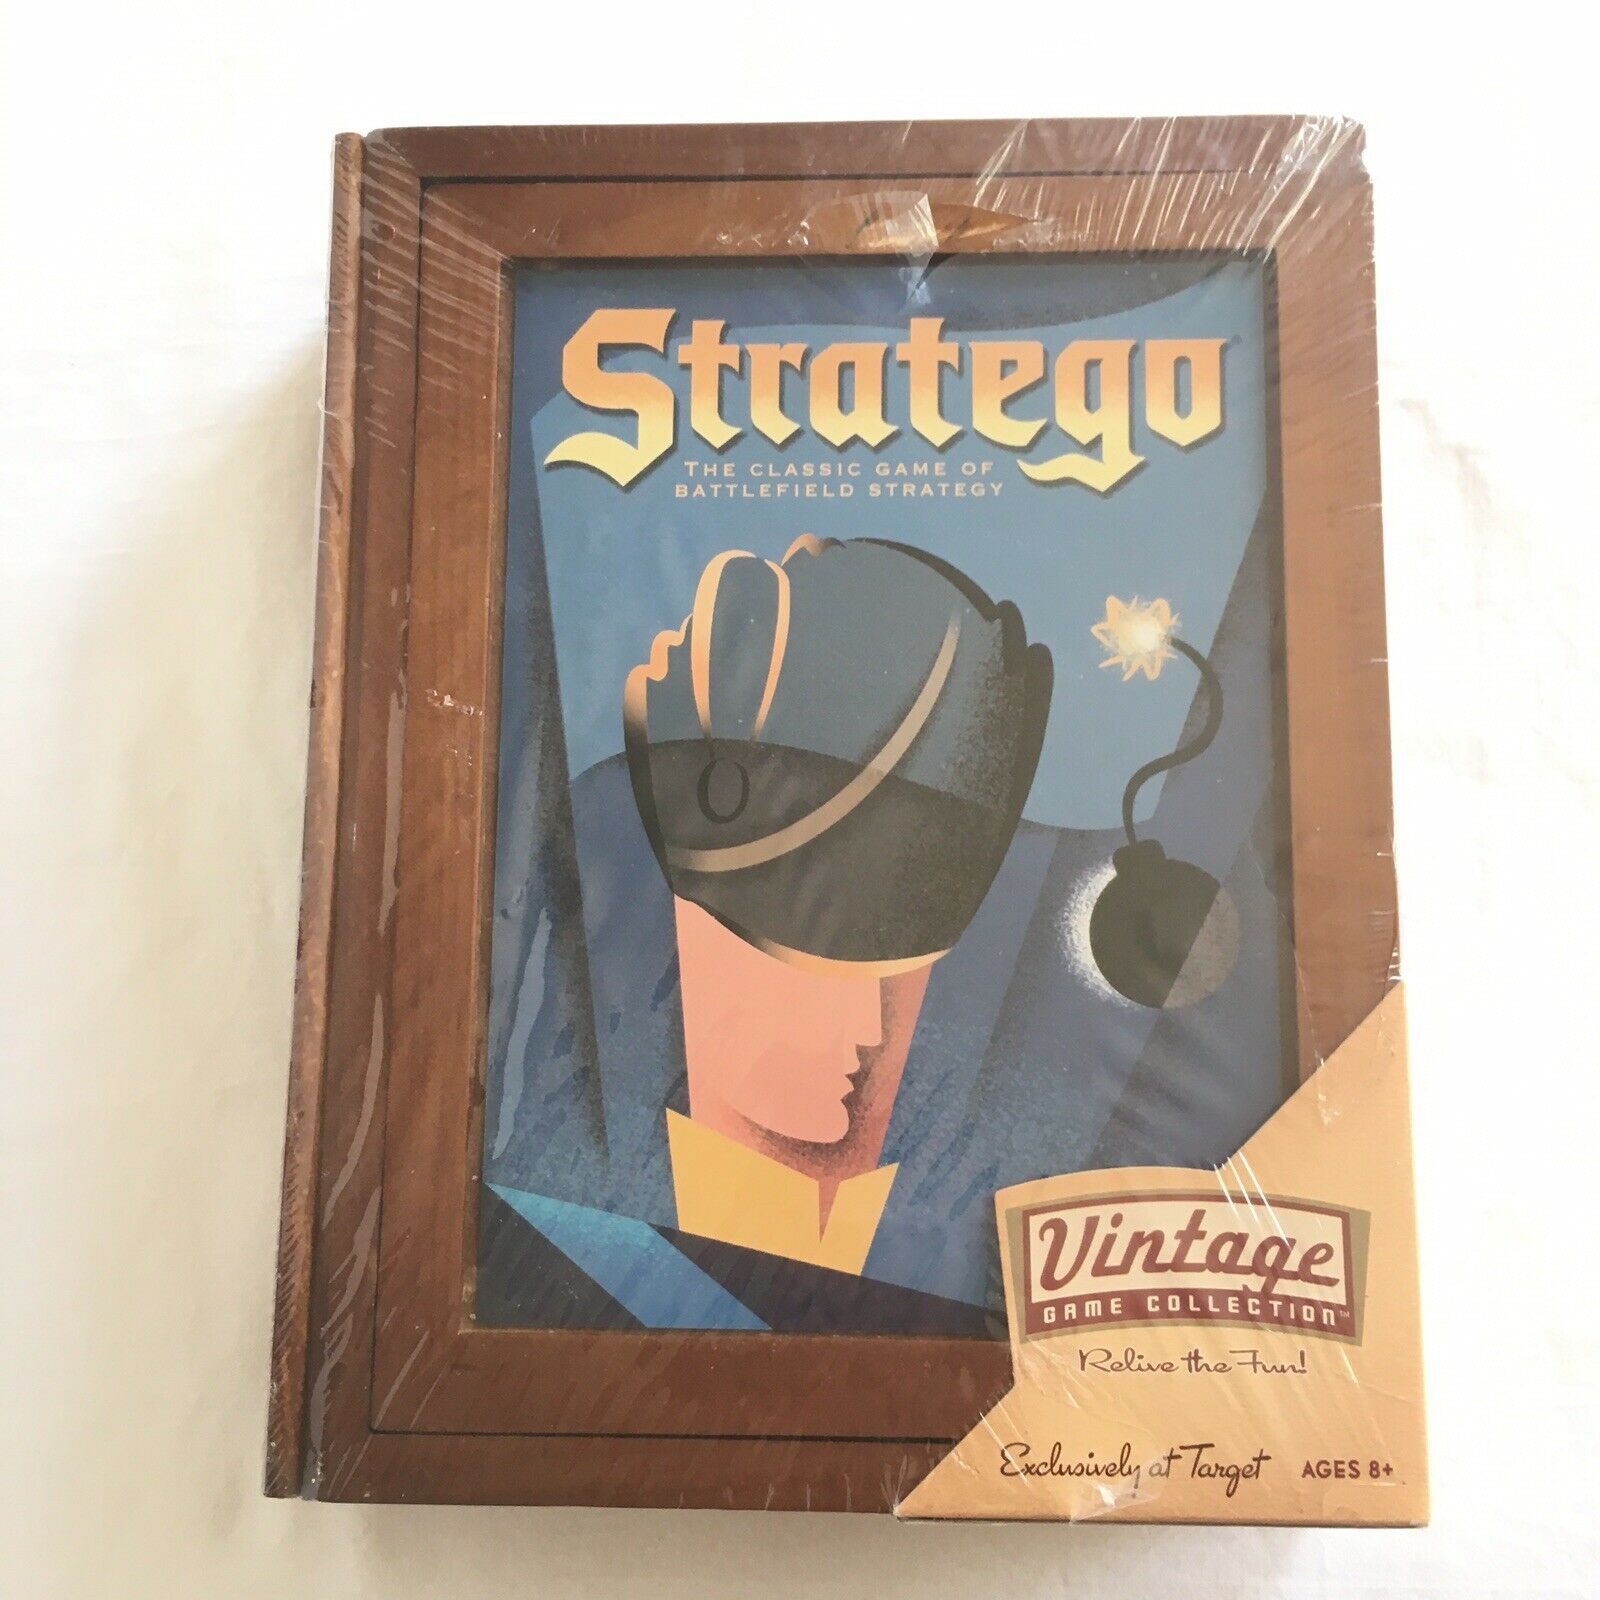 Stratego Vintage Game Collection Wooden Box New